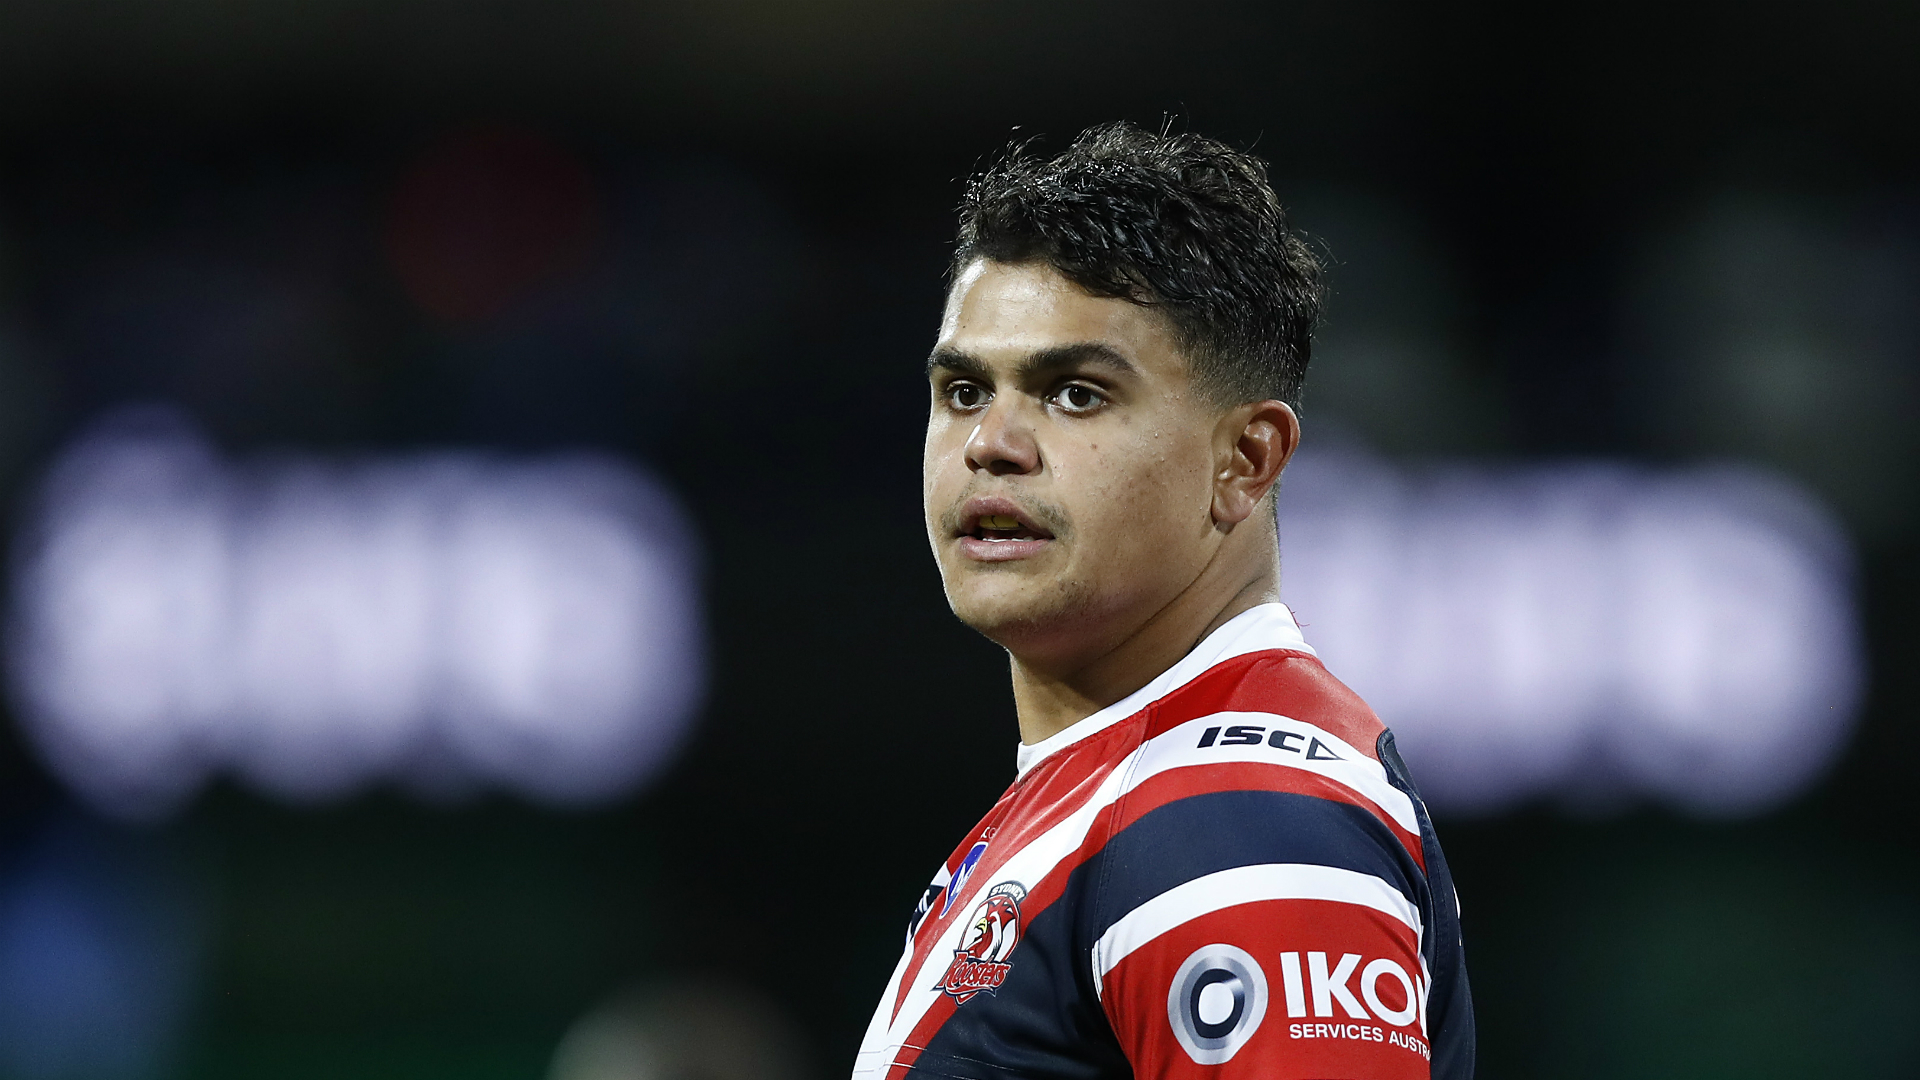 Sydney Roosters will aim to show they are back to form when they tackle the NRL-leading Melbourne Storm at the Adelaide Oval.